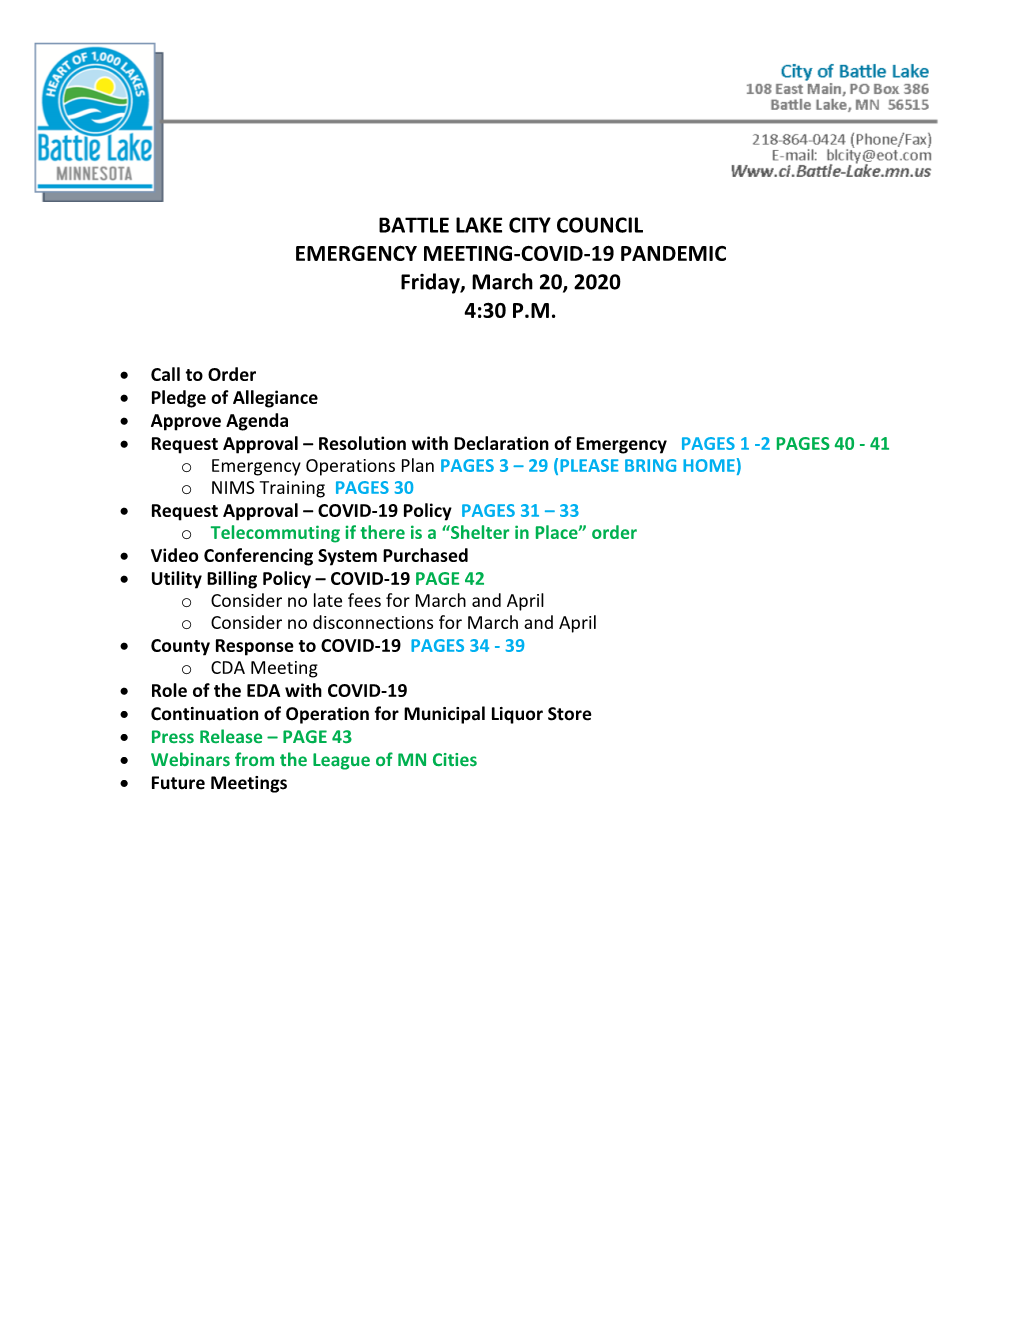 BATTLE LAKE CITY COUNCIL EMERGENCY MEETING-COVID-19 PANDEMIC Friday, March 20, 2020 4:30 P.M